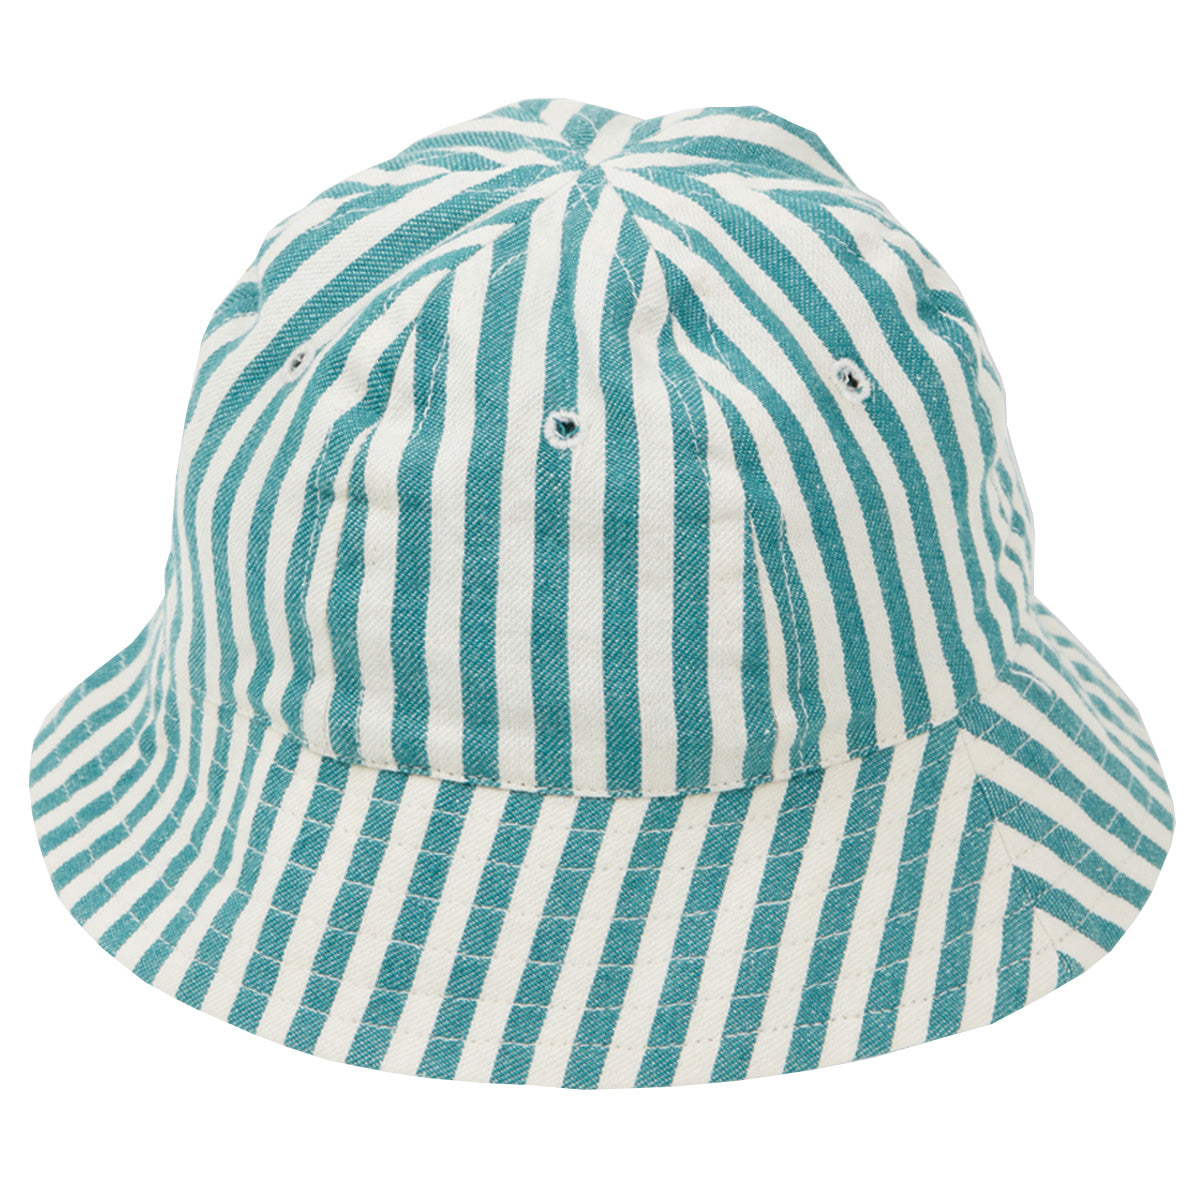 The Bob Baby Denim Stripes Hat from Arsene et Les Pipelettes. Bob baby in striped denim, ideal for protecting yourself